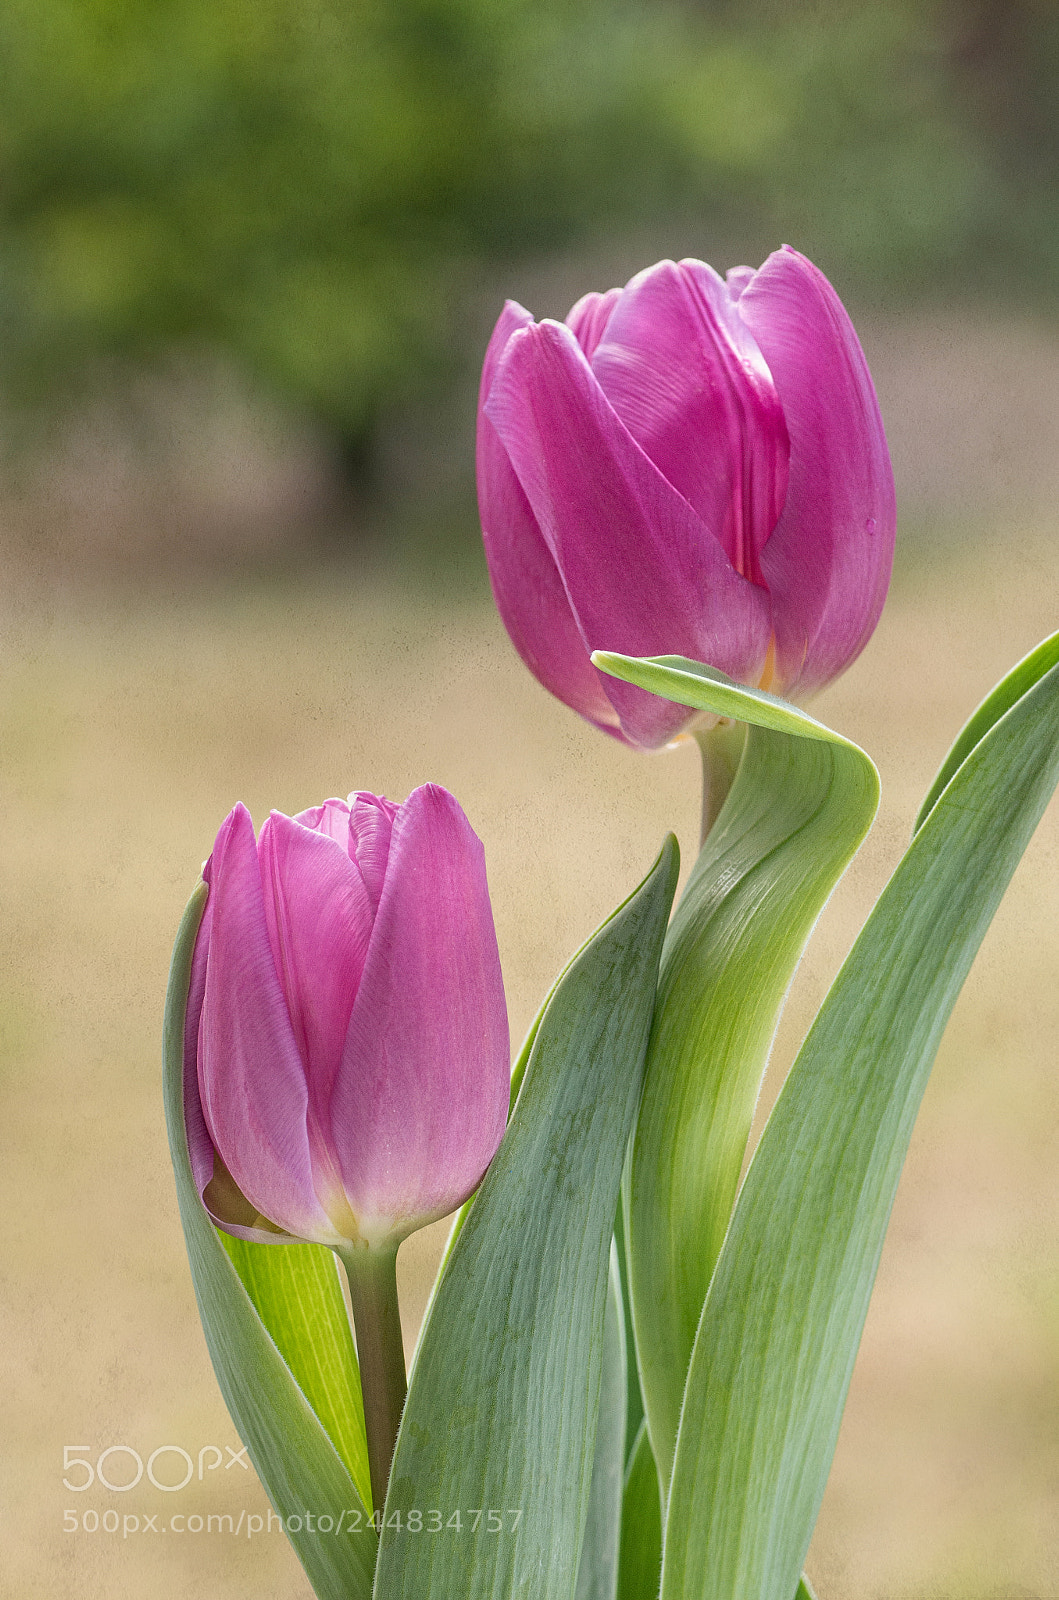 Pentax K-500 sample photo. Two tulips photography